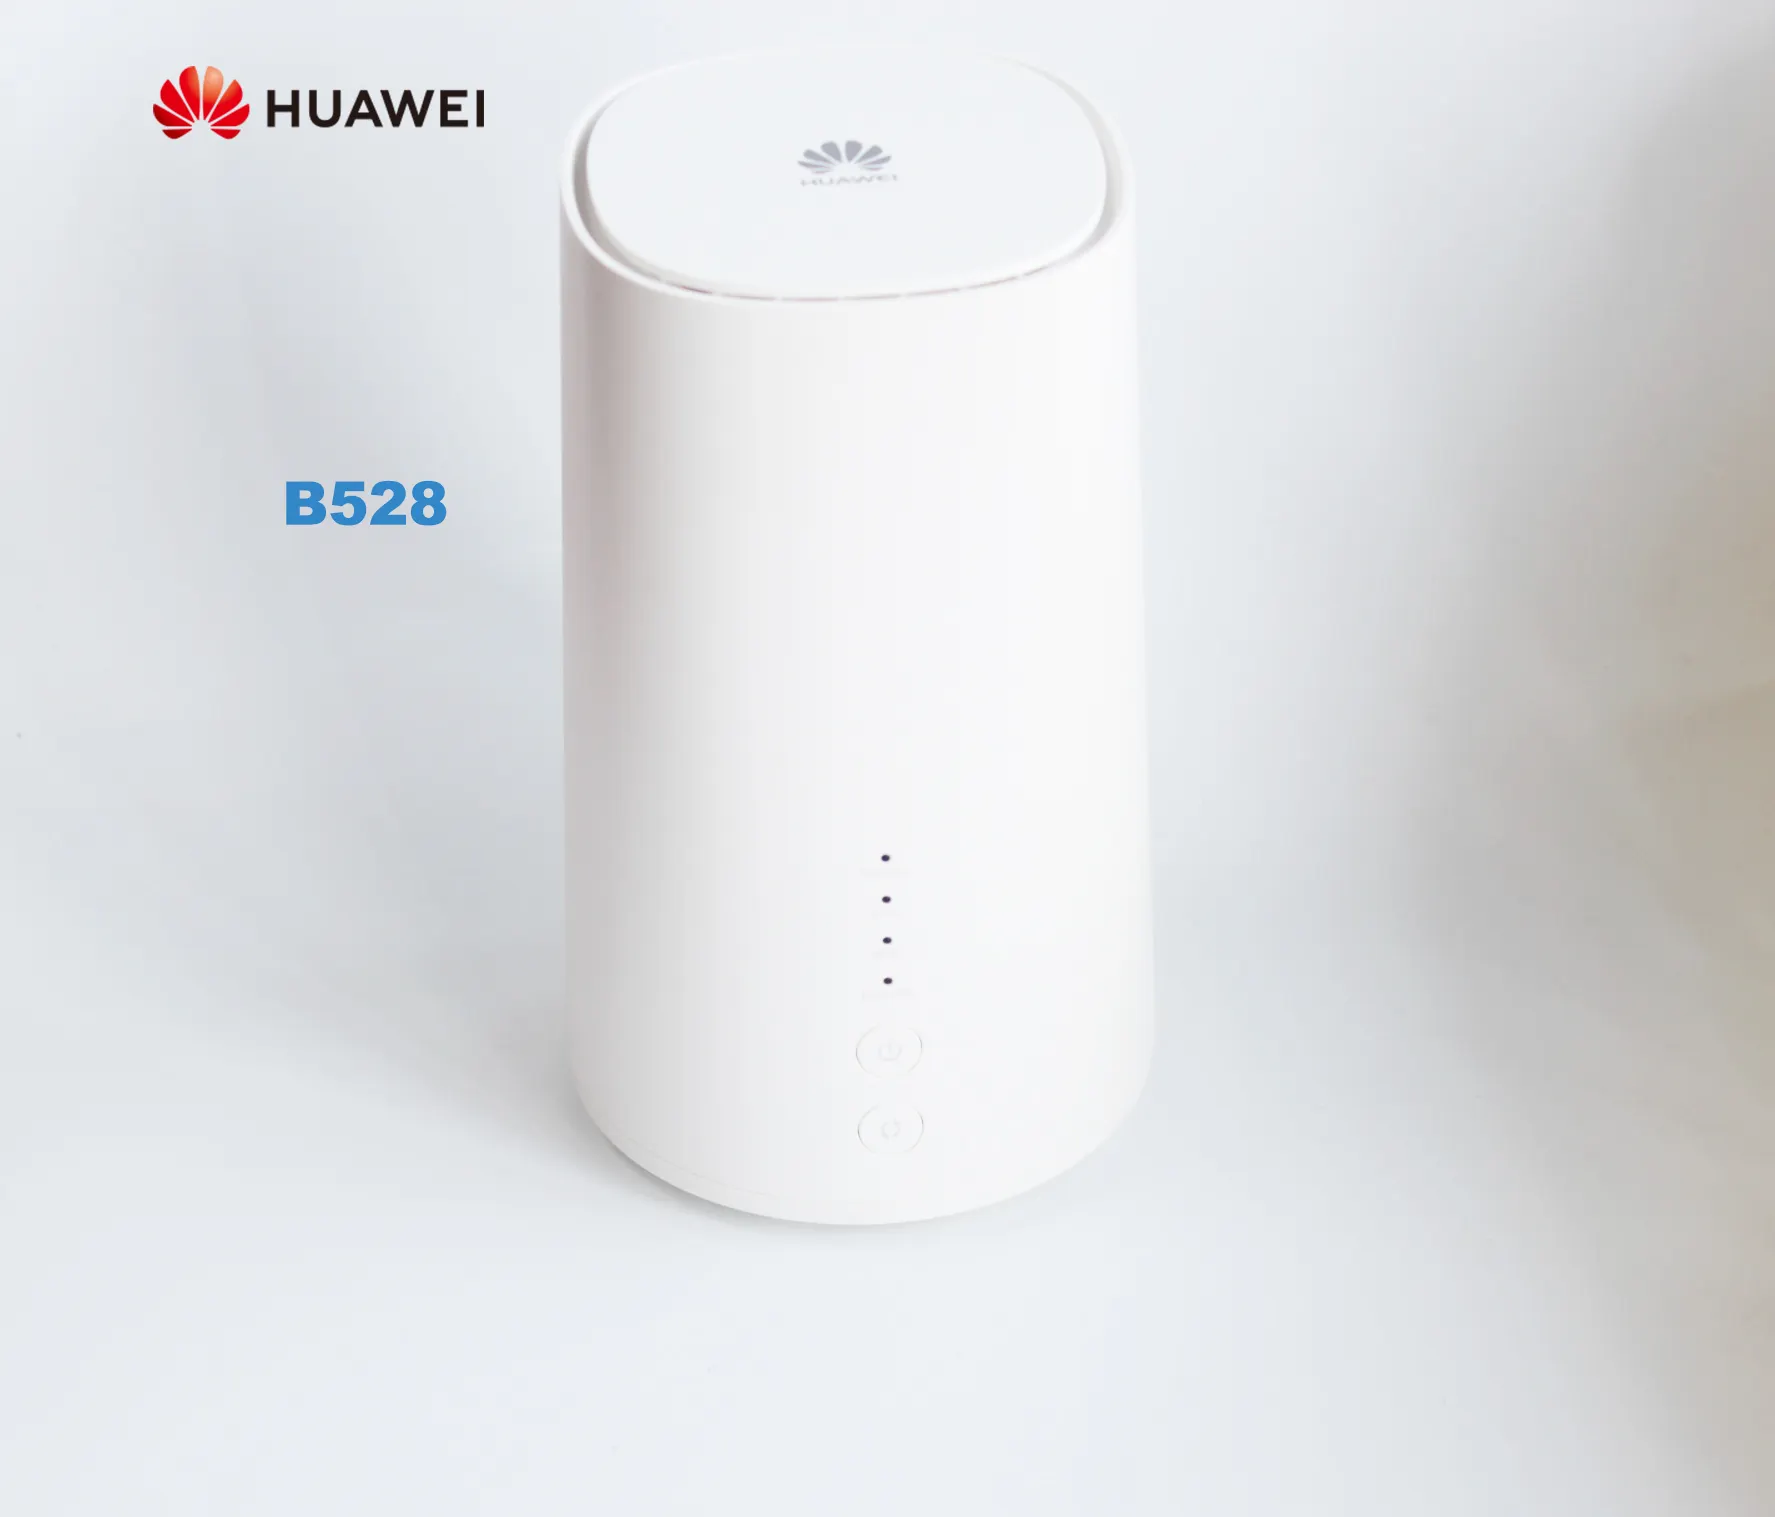 New 4G 5G LTE Cat6 300Mbps Cube Home Router Wireless for Unlocked Huawei B528s-23a huawei B528 4g CPE router